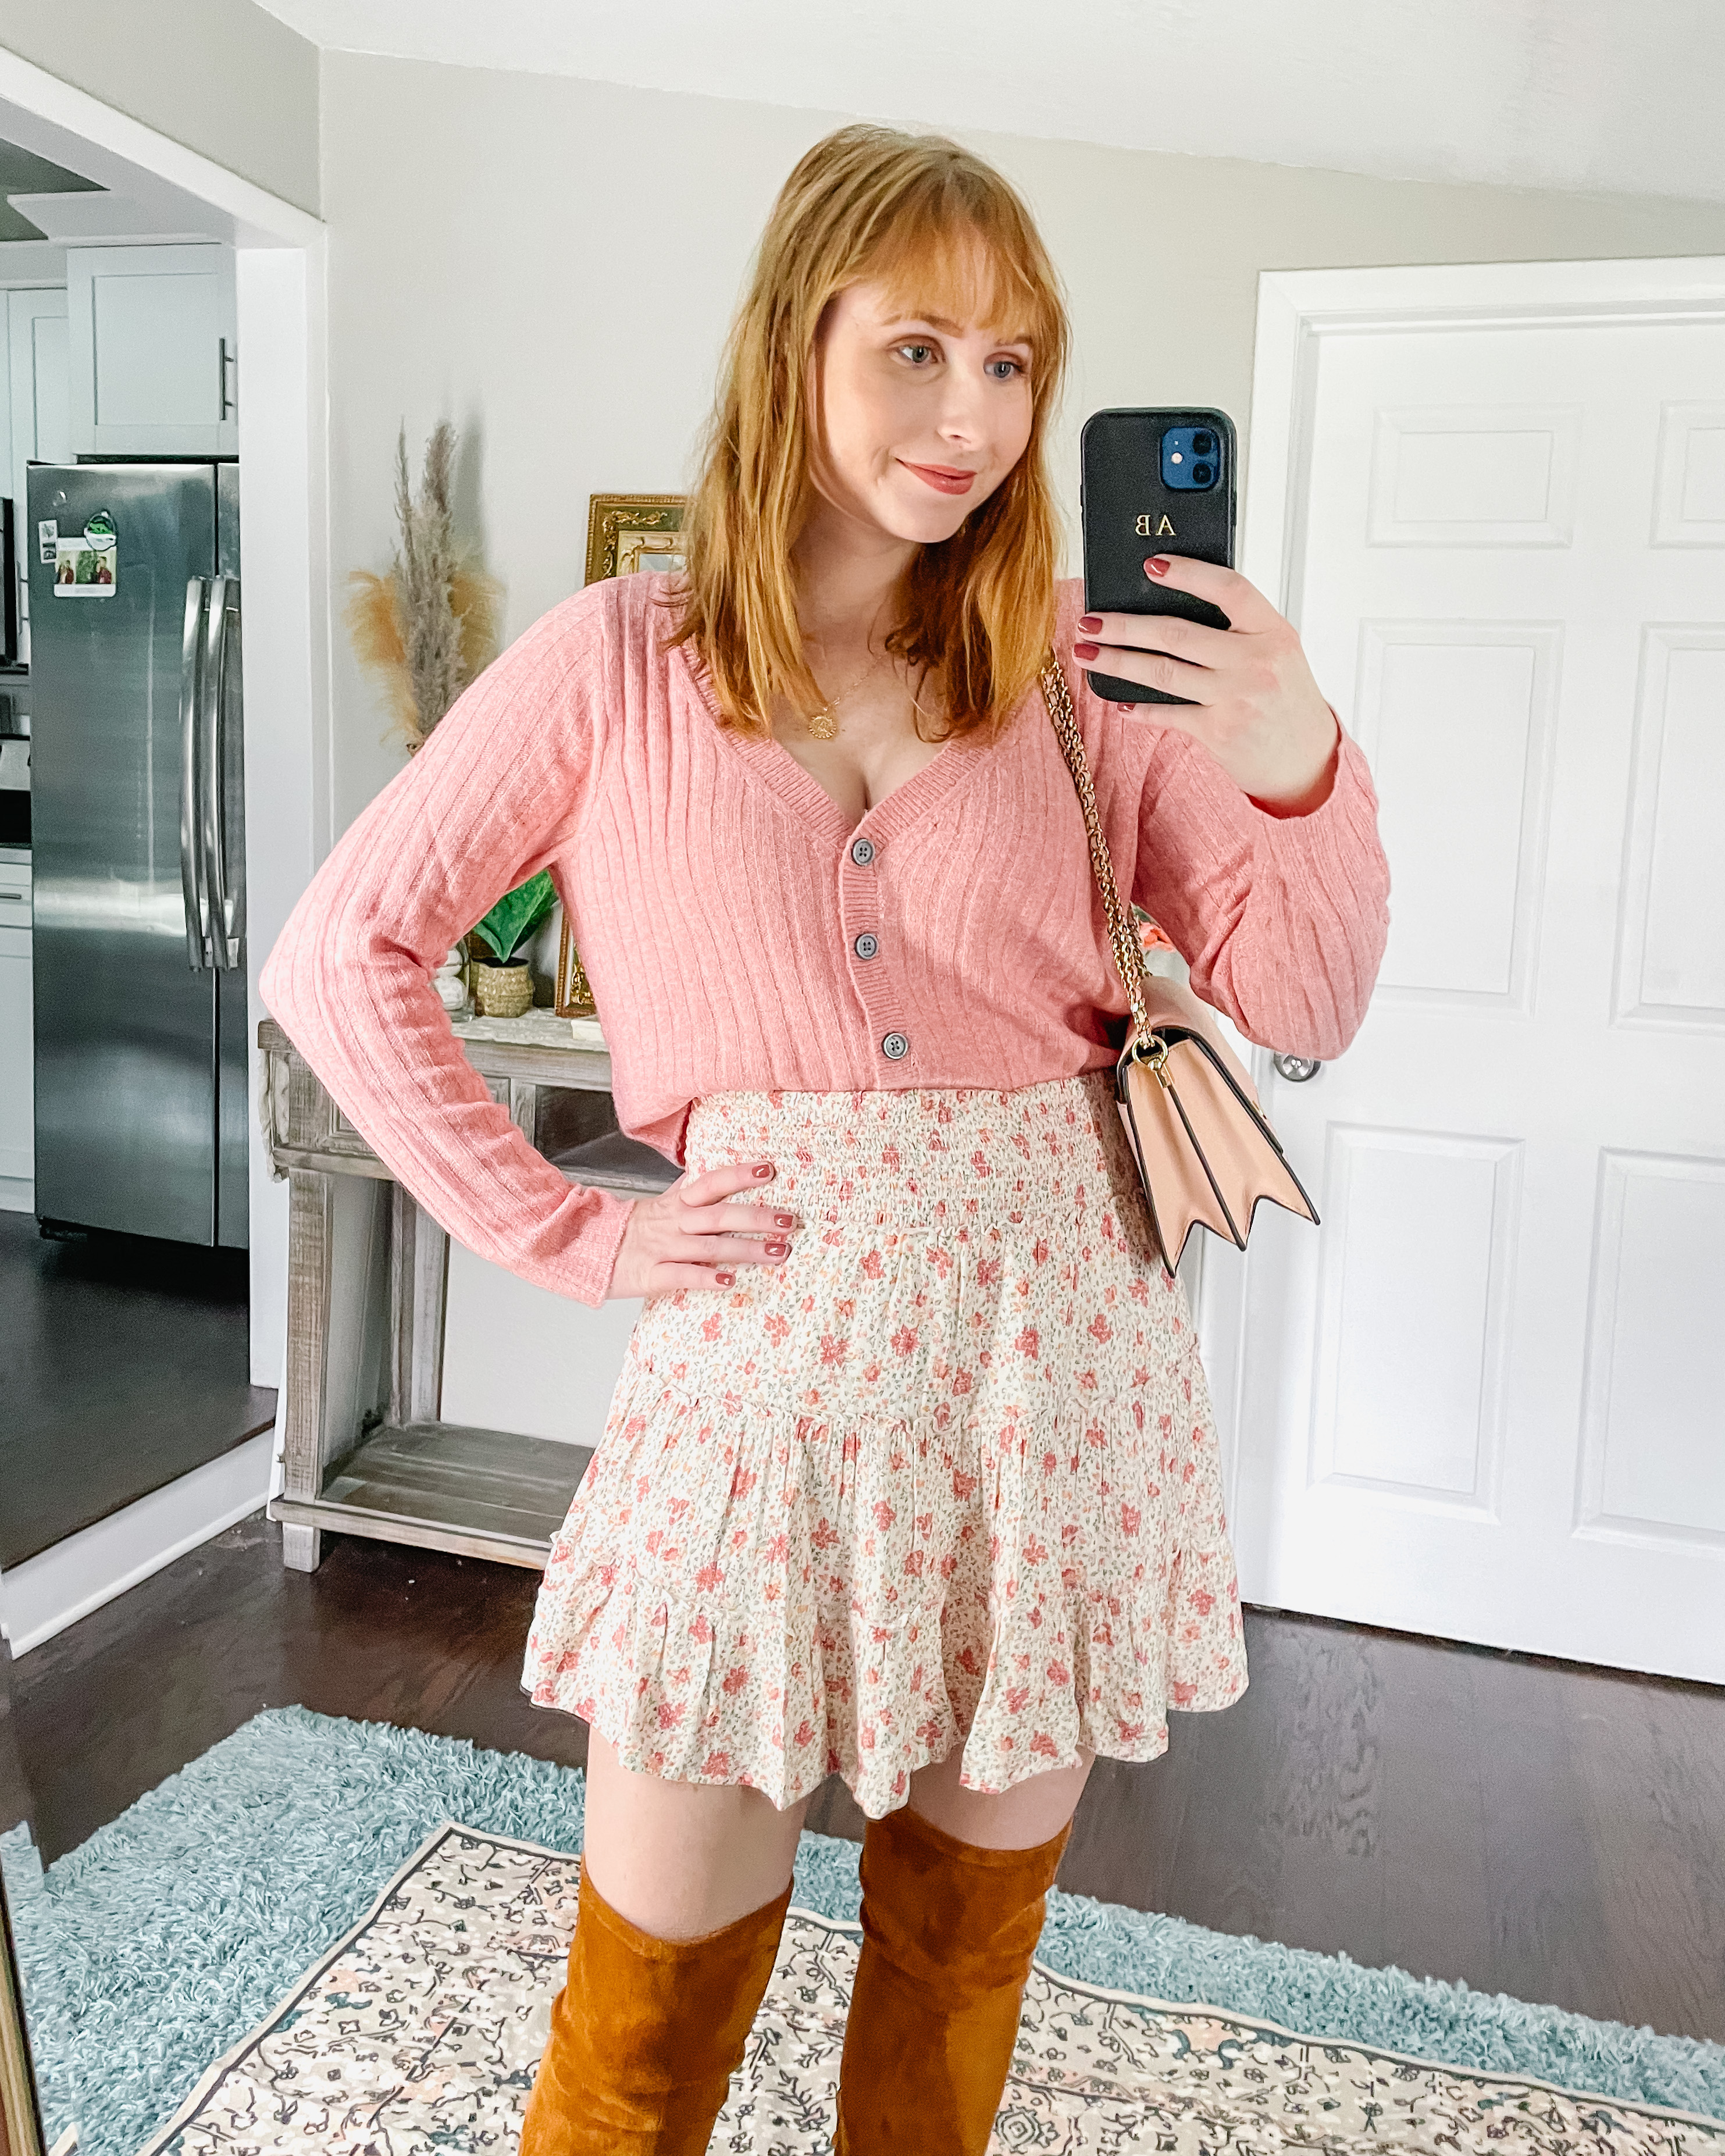 AE Cropped Dreamspun Button Up Cardigan | AE Tiered Smocked Mini Skirt | American Eagle Haul 2021 | Affordable by Amanda